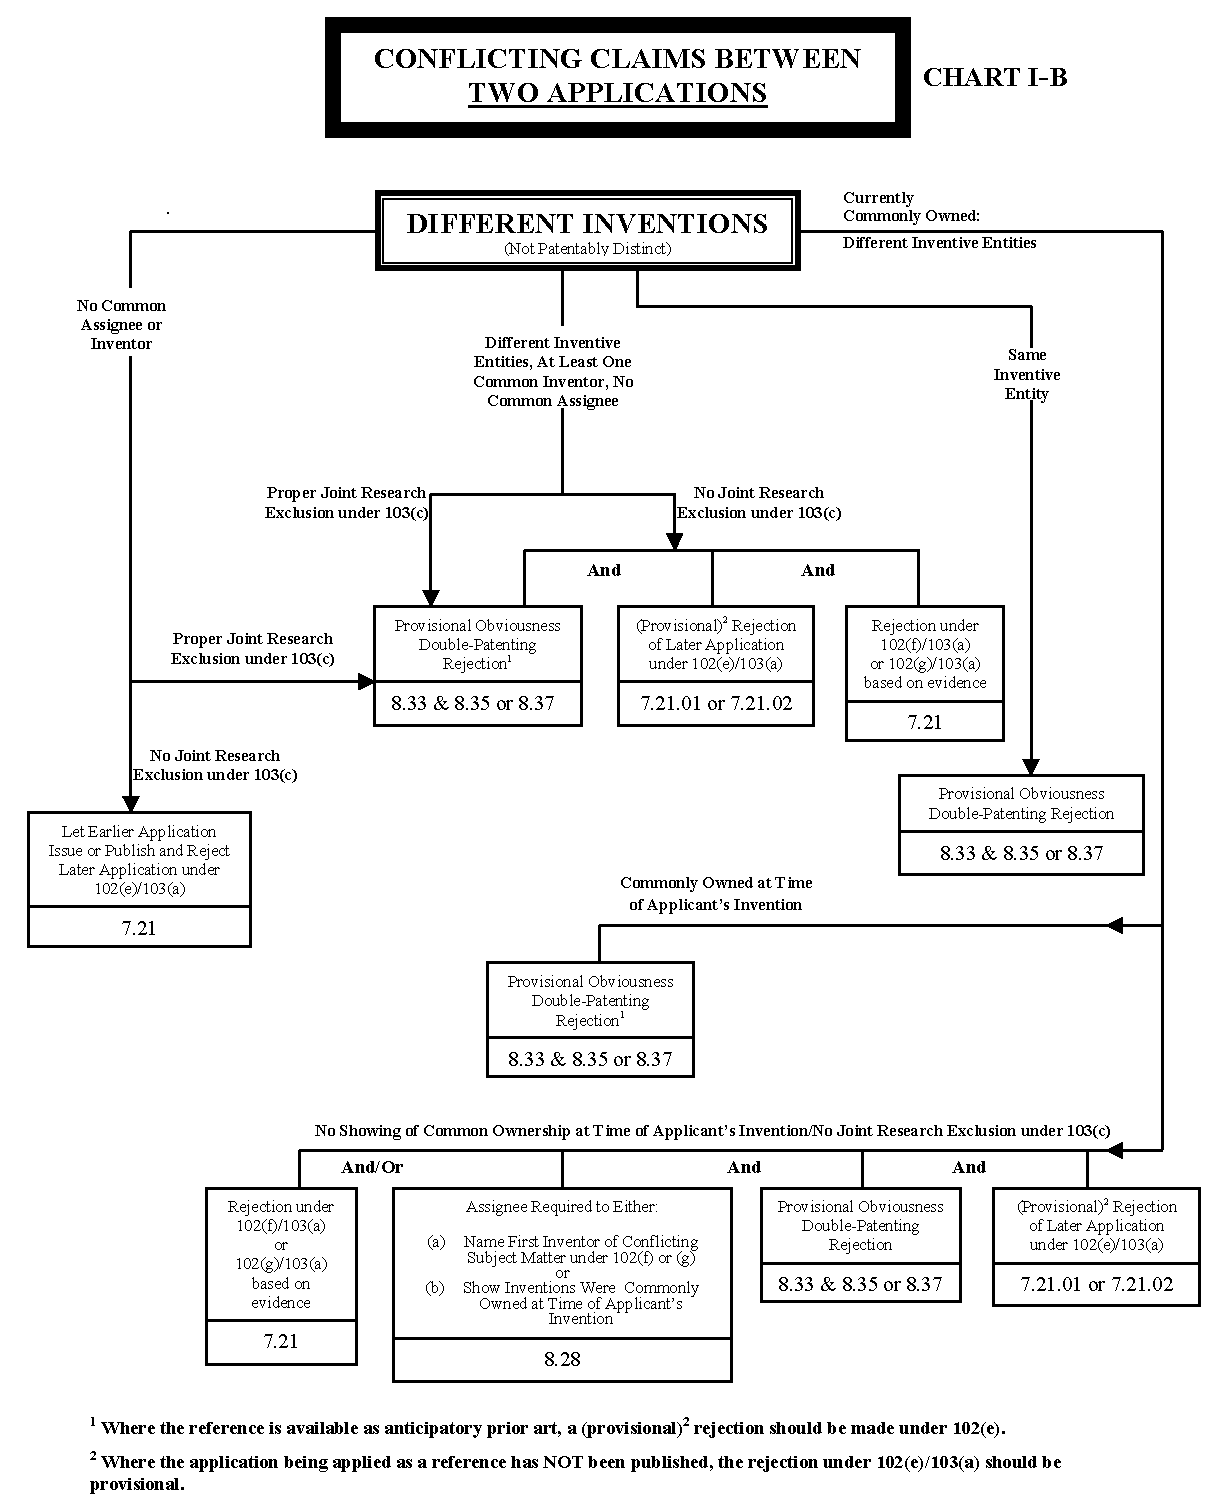 flowchart for two applications, different inventions, with conflicting claims